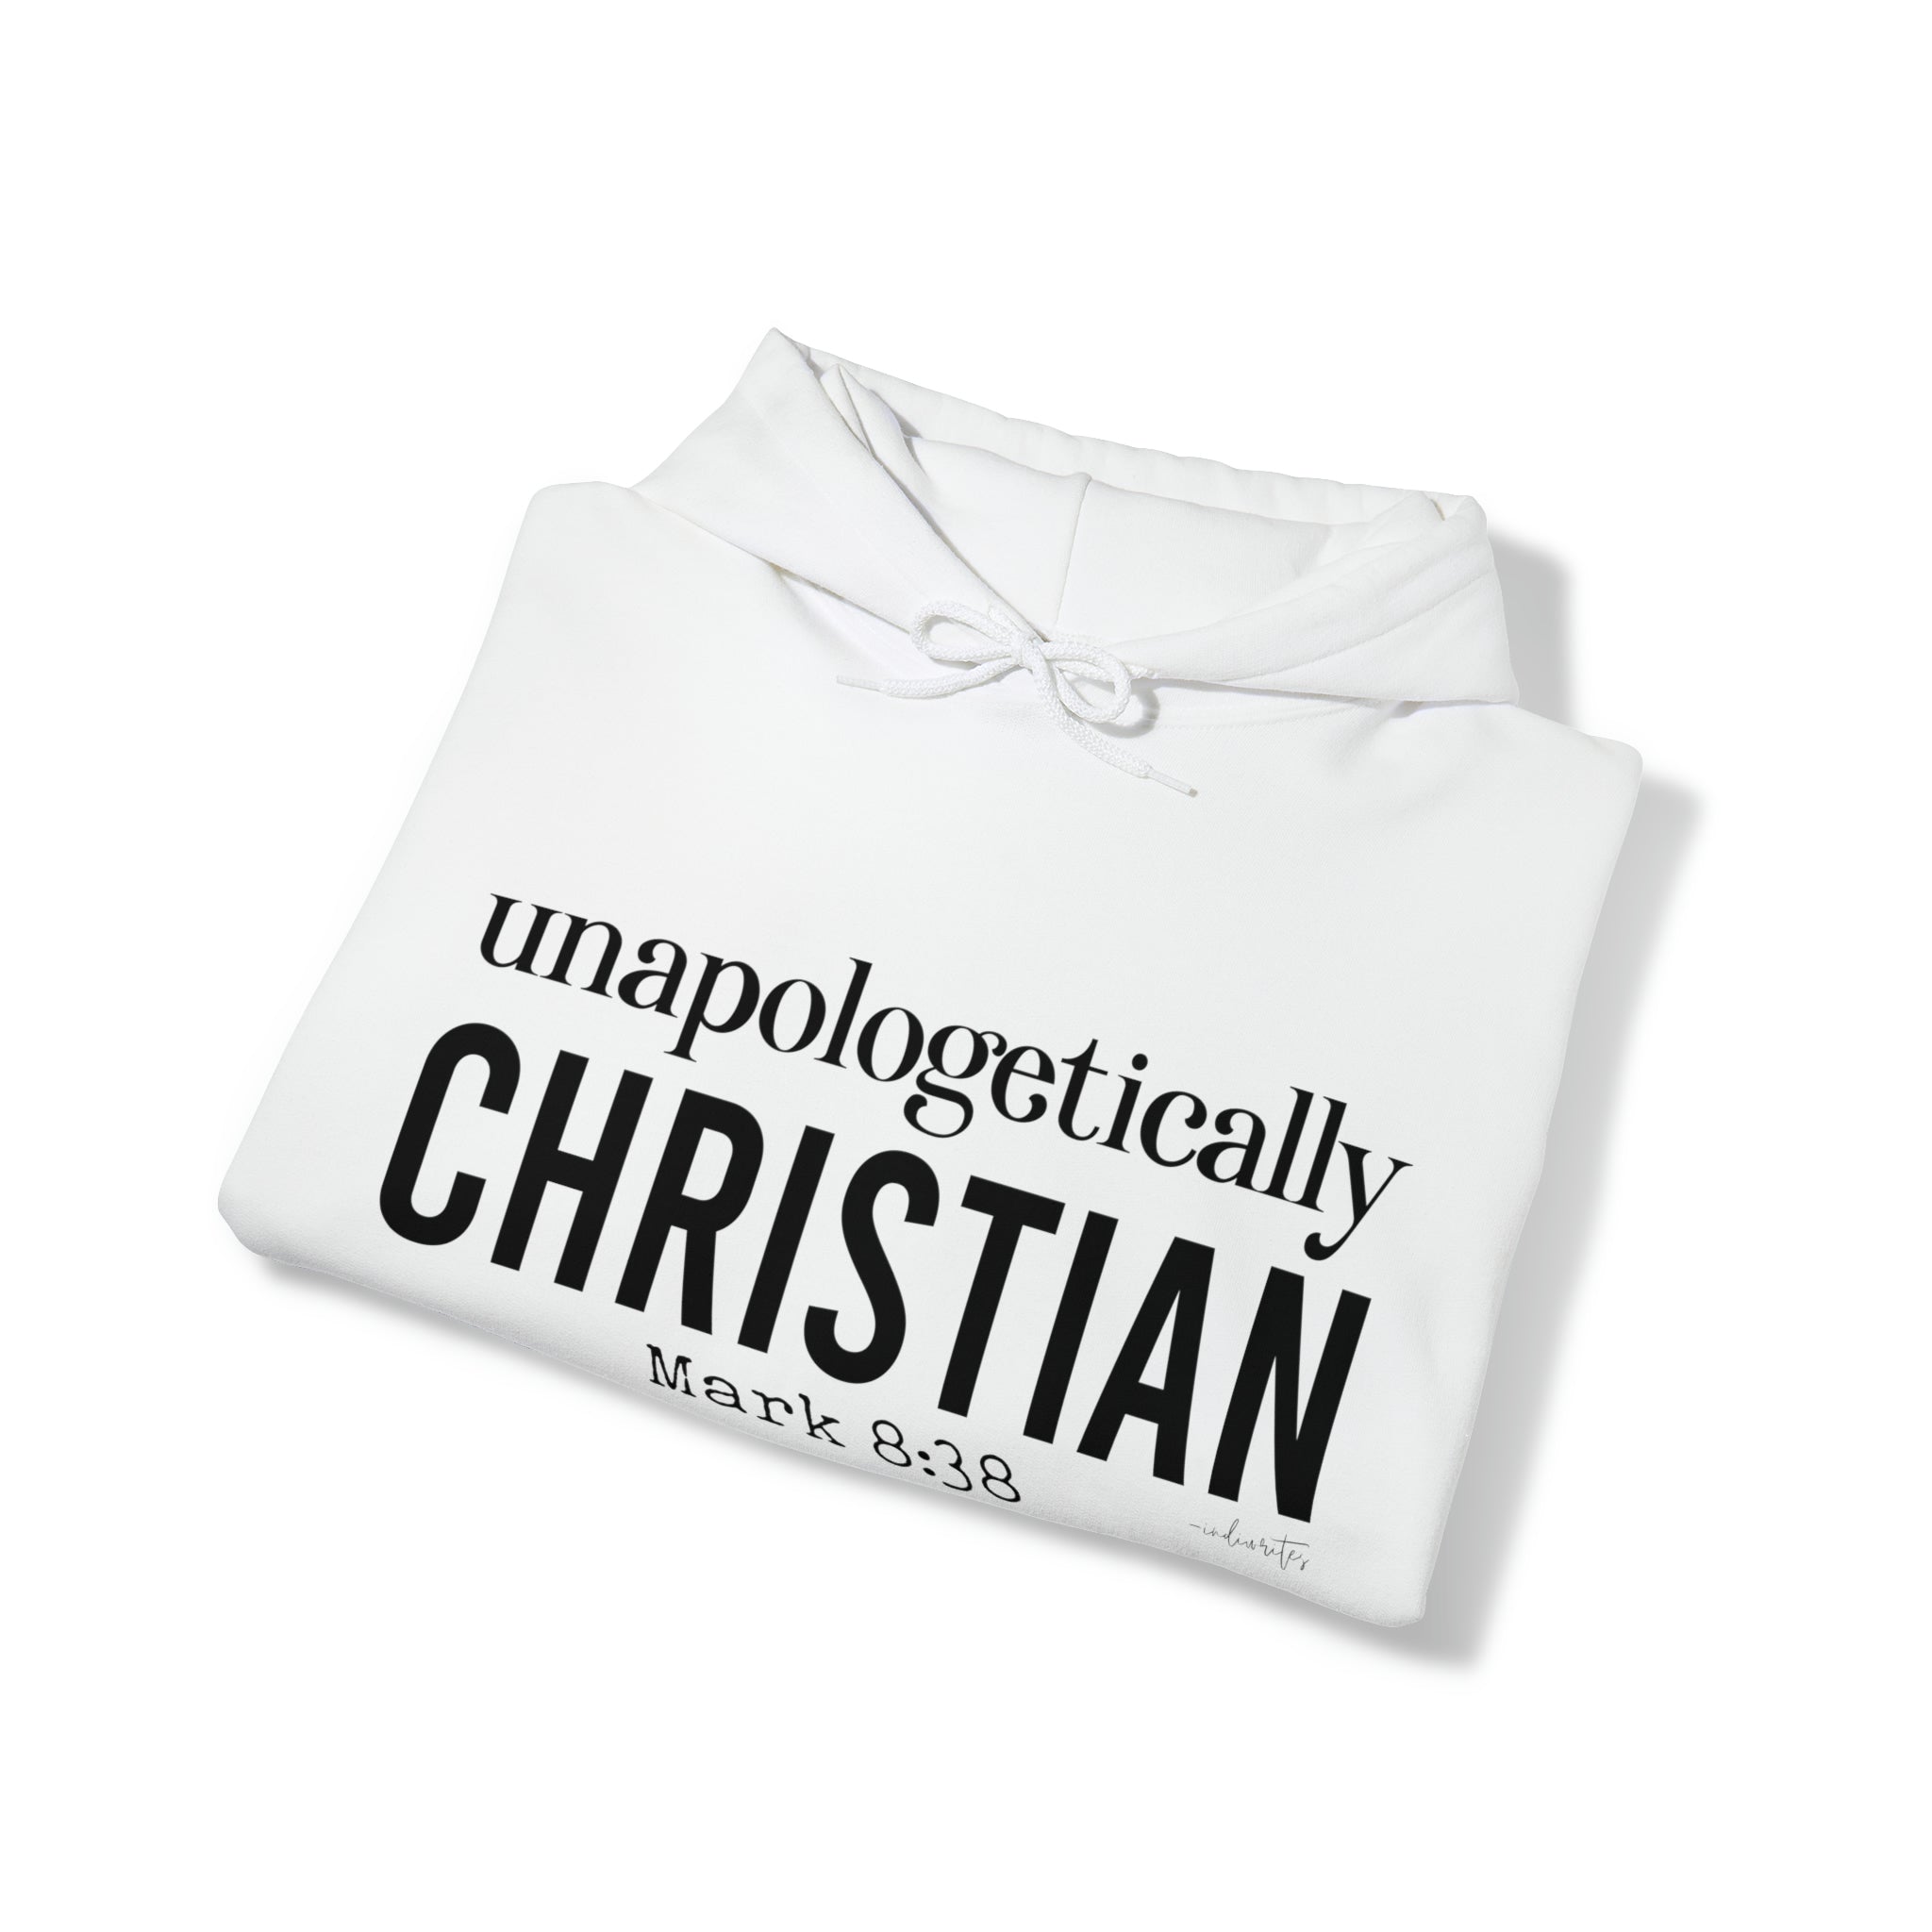 Unapologetically Christian Hoodie